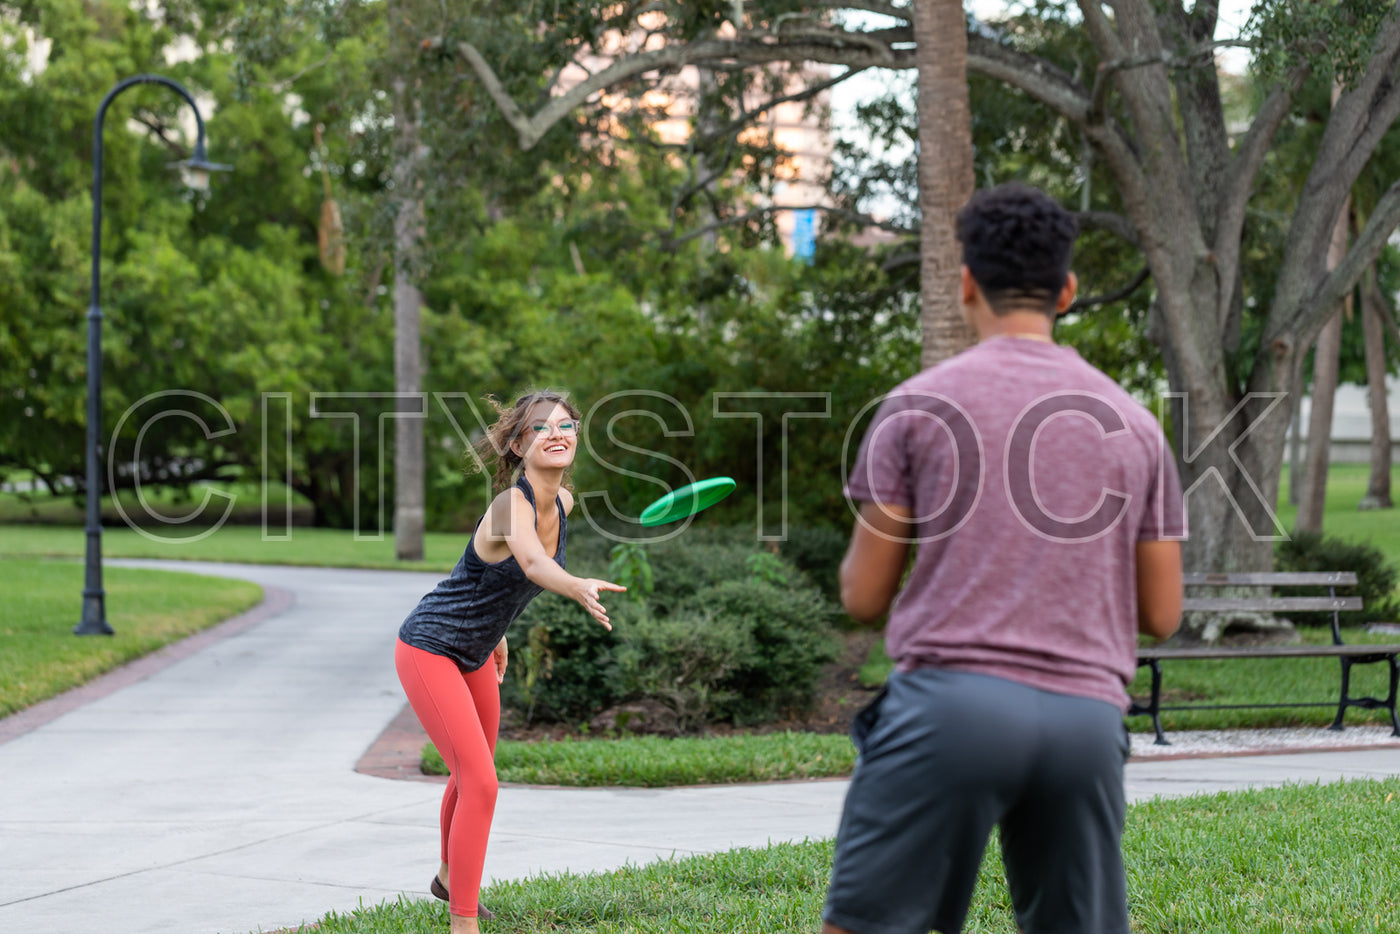 Young woman catching frisbee in Tampa park, sporting vibrant casual wear